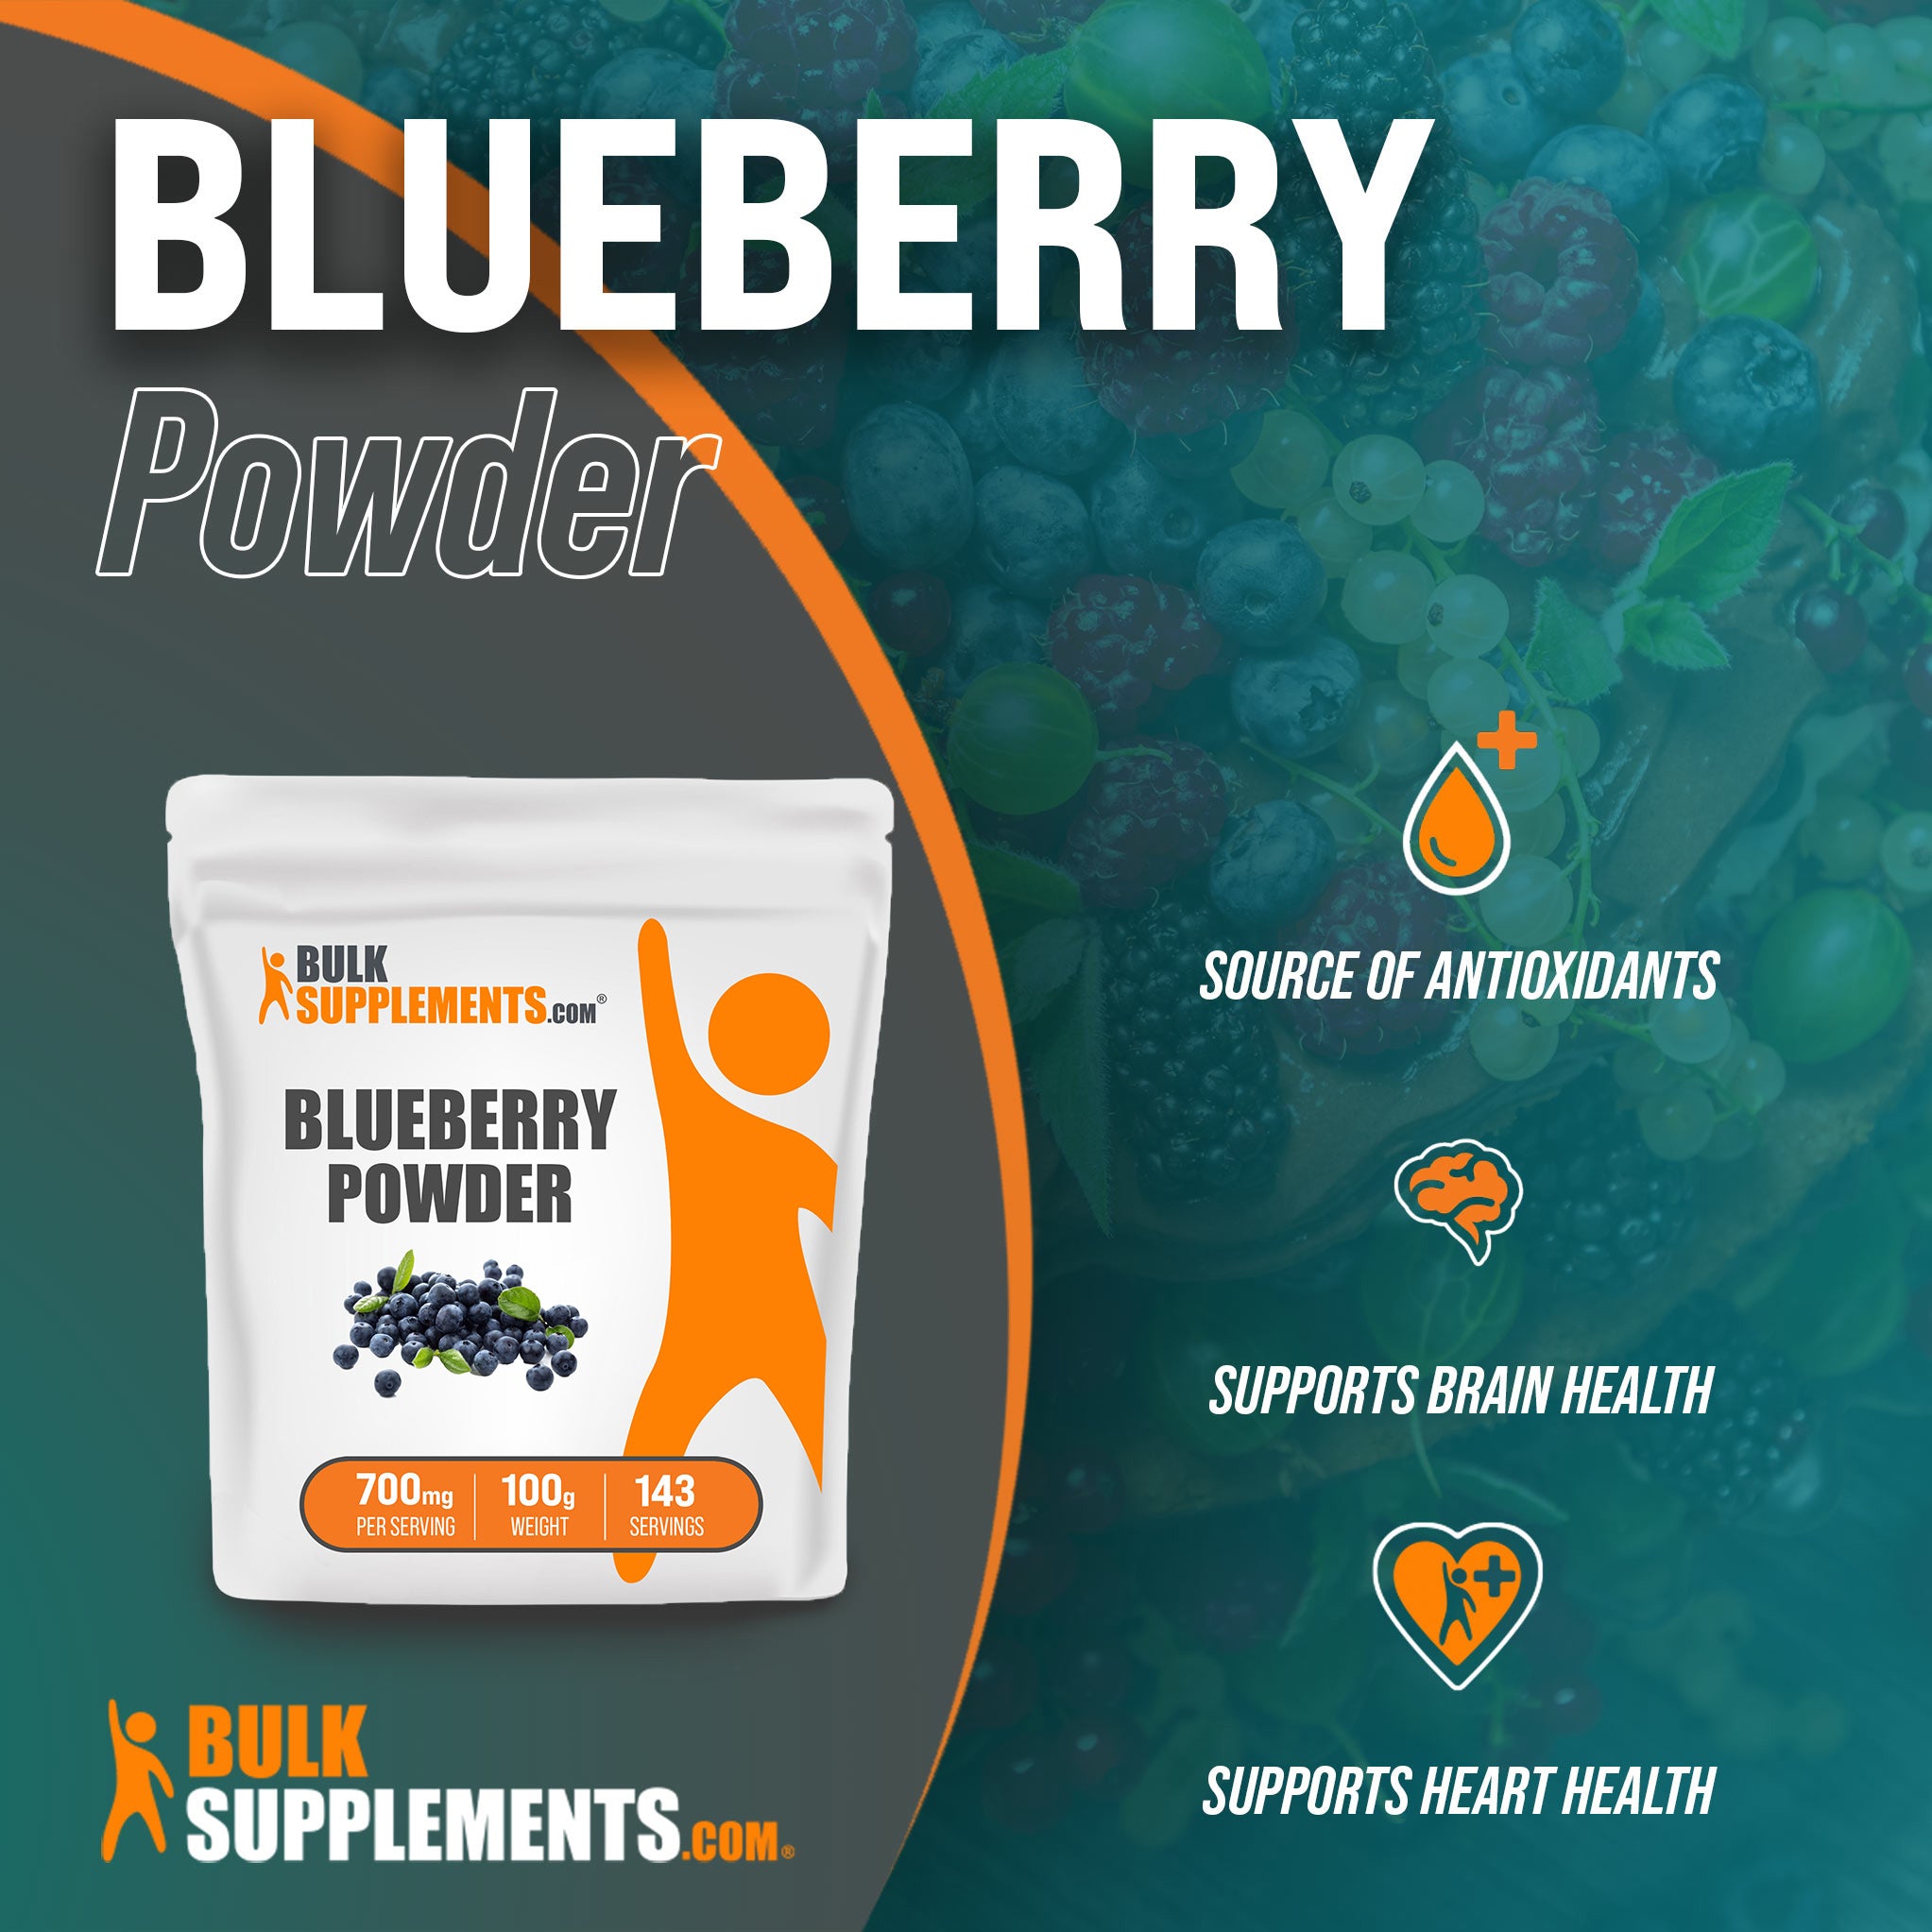 Benefits of Blueberry Powder; source of antioxidants, supports brain health, supports heart health